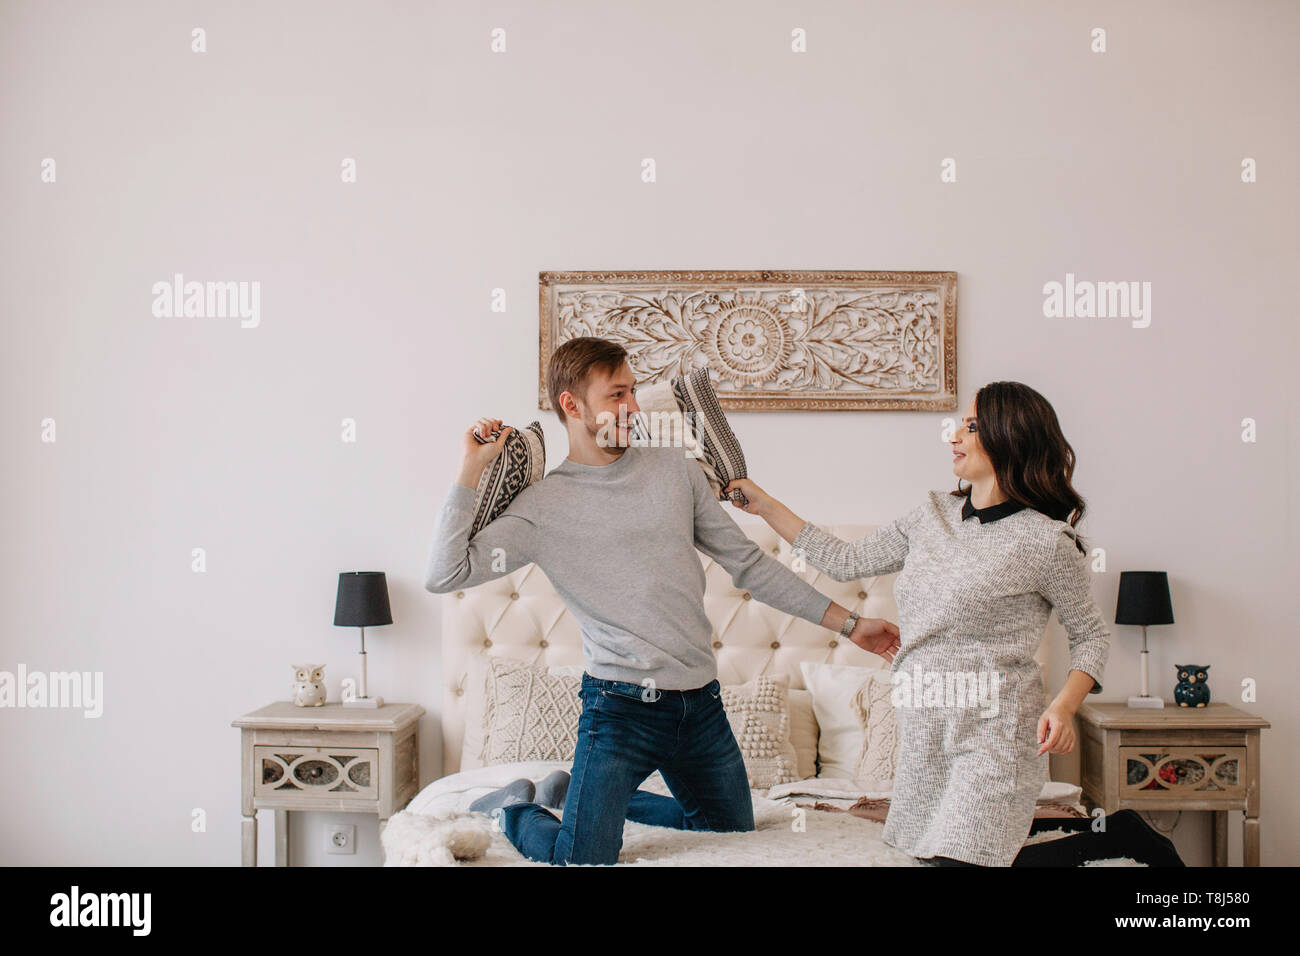 Couple having a pillow fight in the bedroom Stock Photo